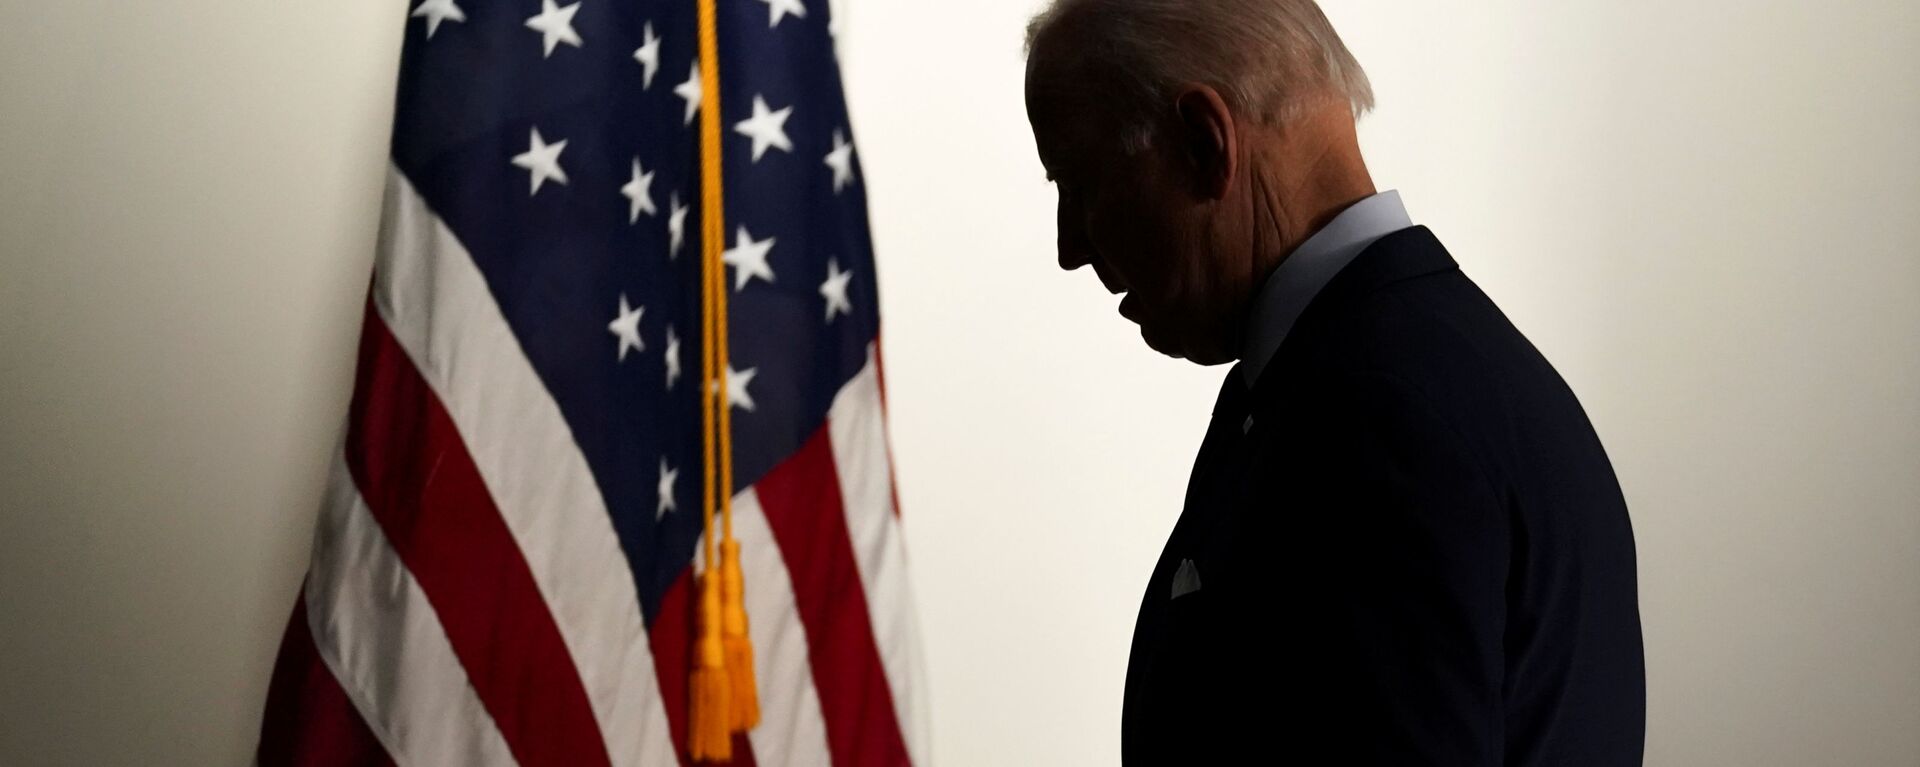 U.S. President Joe Biden departs the room after speaking about jobs and the economy at the White House in Washington, U.S., April 7, 2021. - Sputnik International, 1920, 08.04.2021